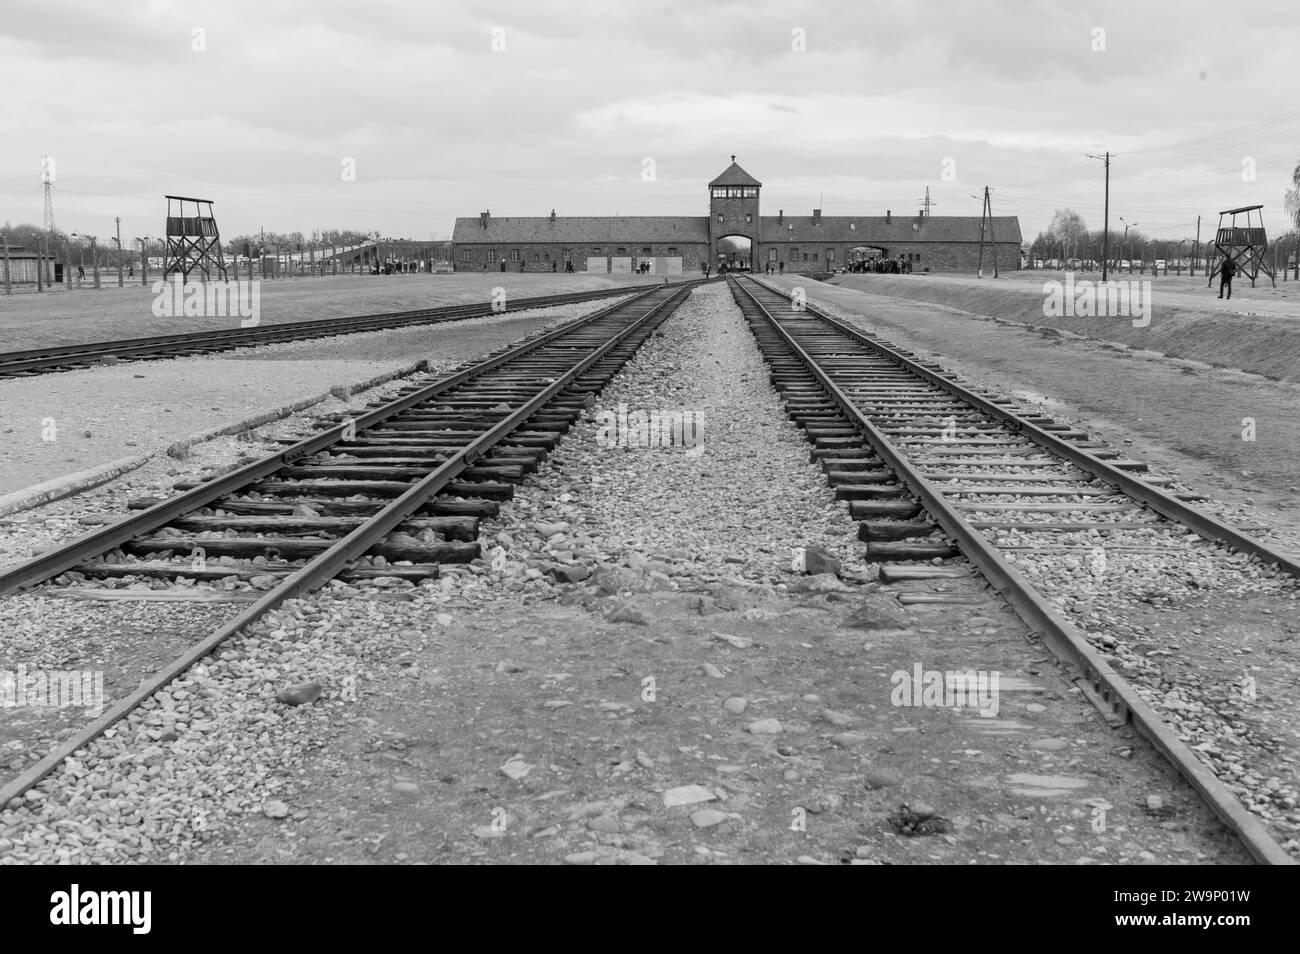 Rail tracks and entry to Auschwitz  Birkenau concentration camps, Poland Stock Photo